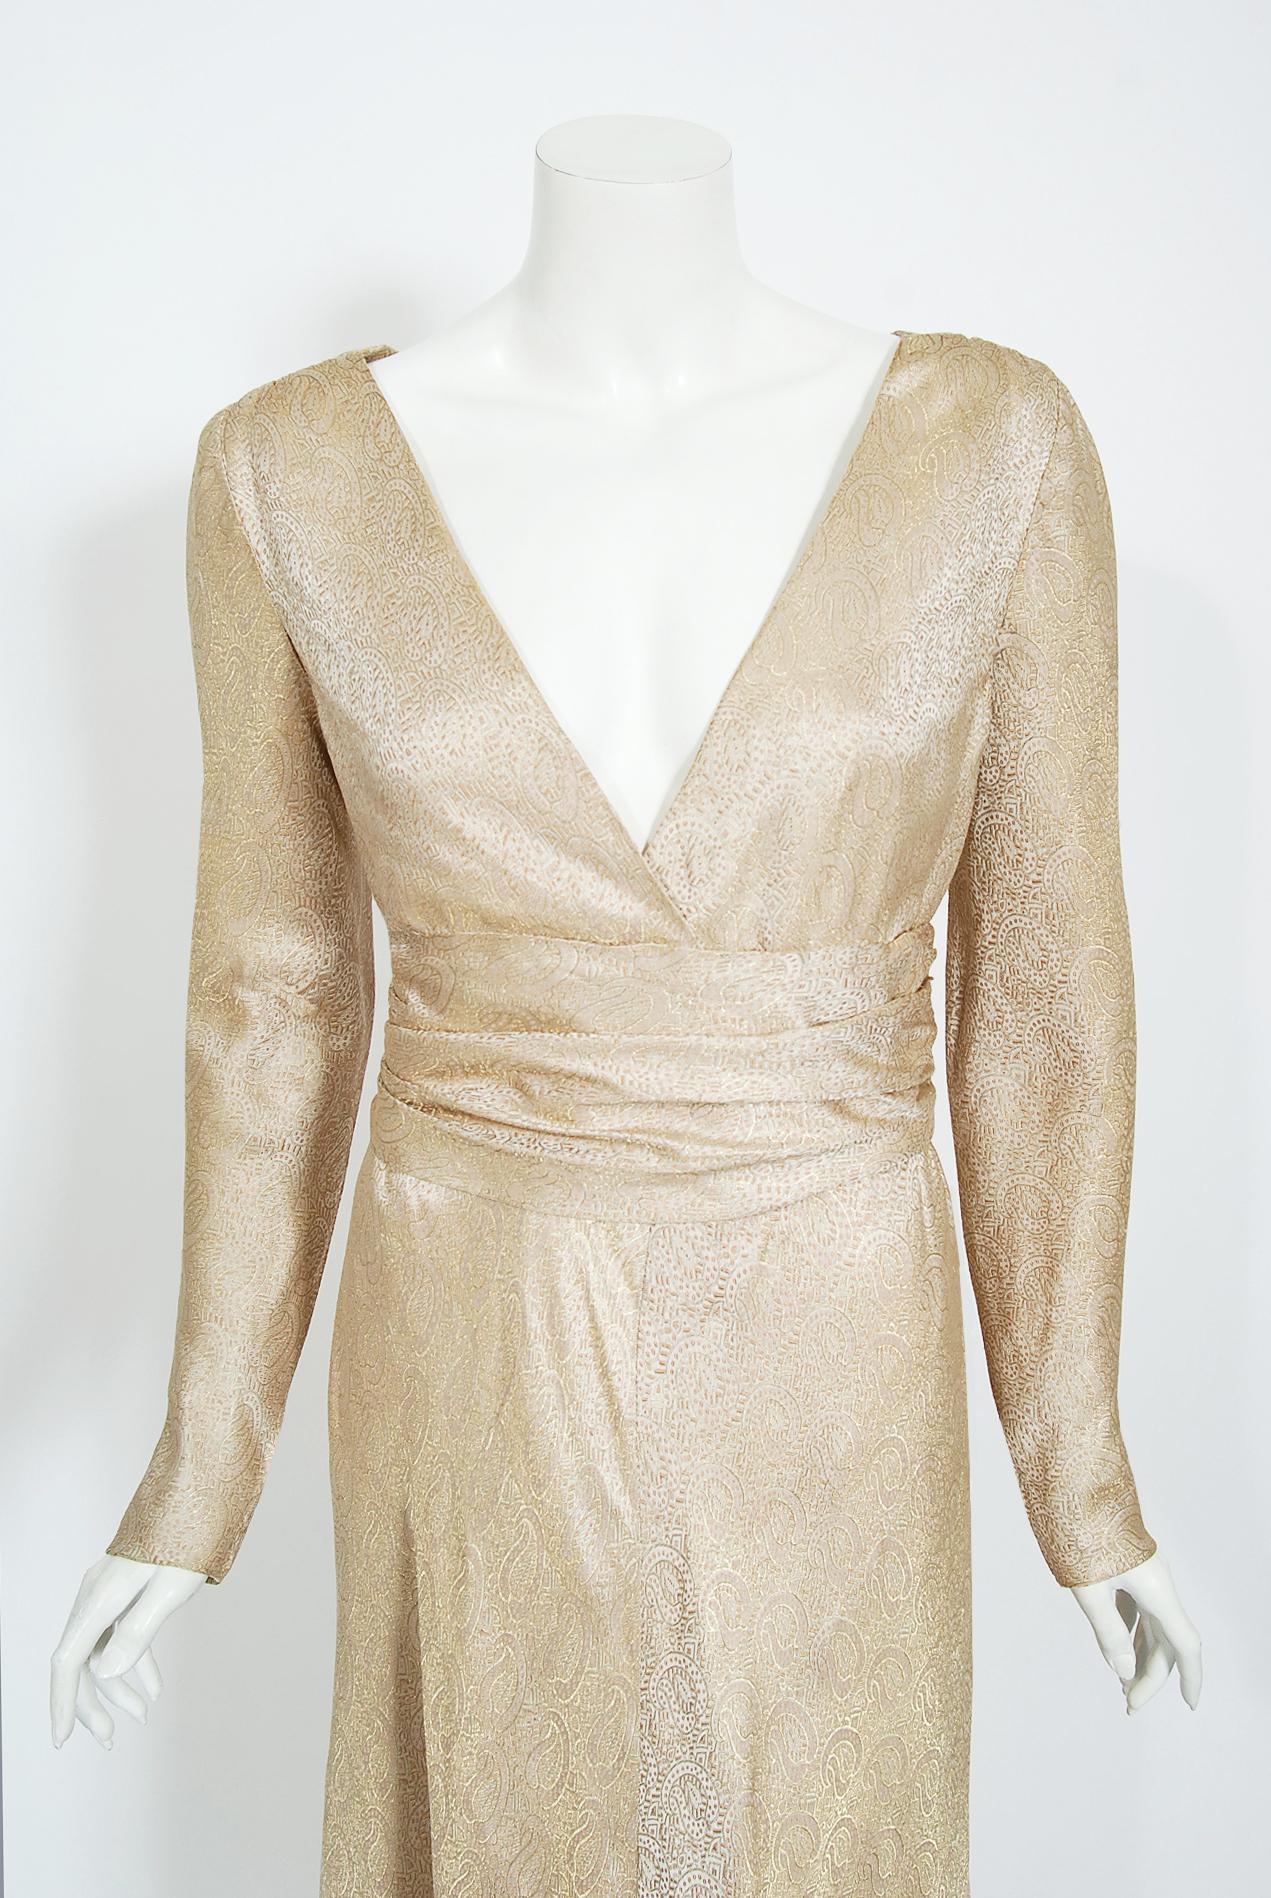 Givenchy, the name itself evokes glamour, refined elegance, simplicity and style. Givenchy's trademark of sculpted lines and luxurious fabrics make his work easily recognizable. This gorgeous gold gown, dating back to his 1972 haute couture